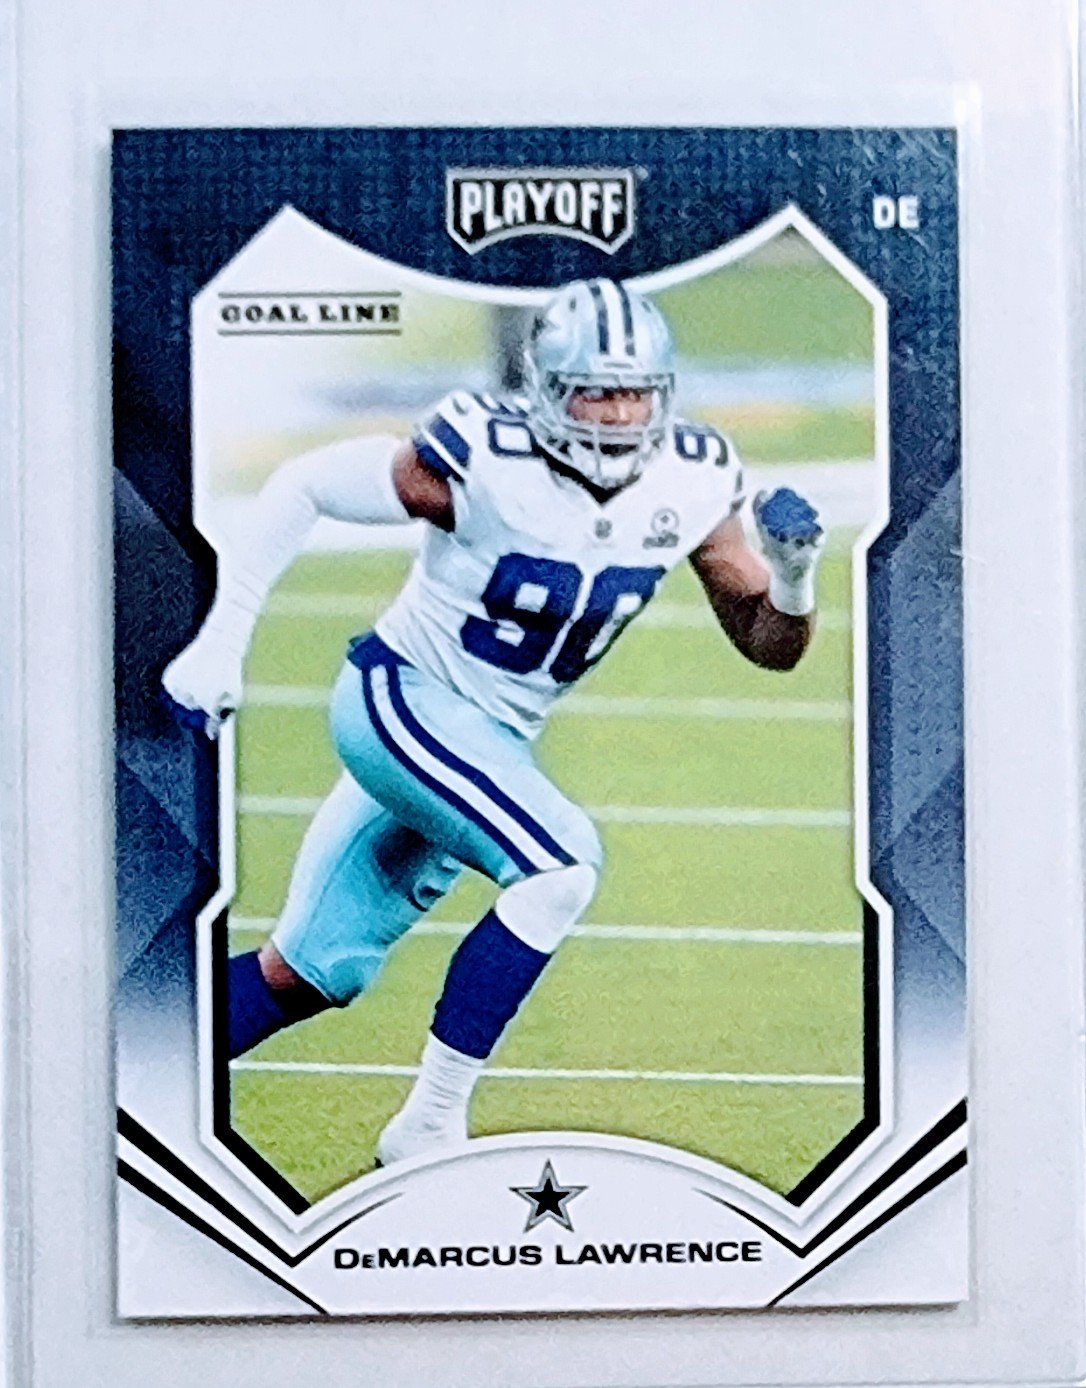 2021 Panini Rookies and Stars DeMarcus Lawrence Goal line Football Card AVM1 simple Xclusive Collectibles   